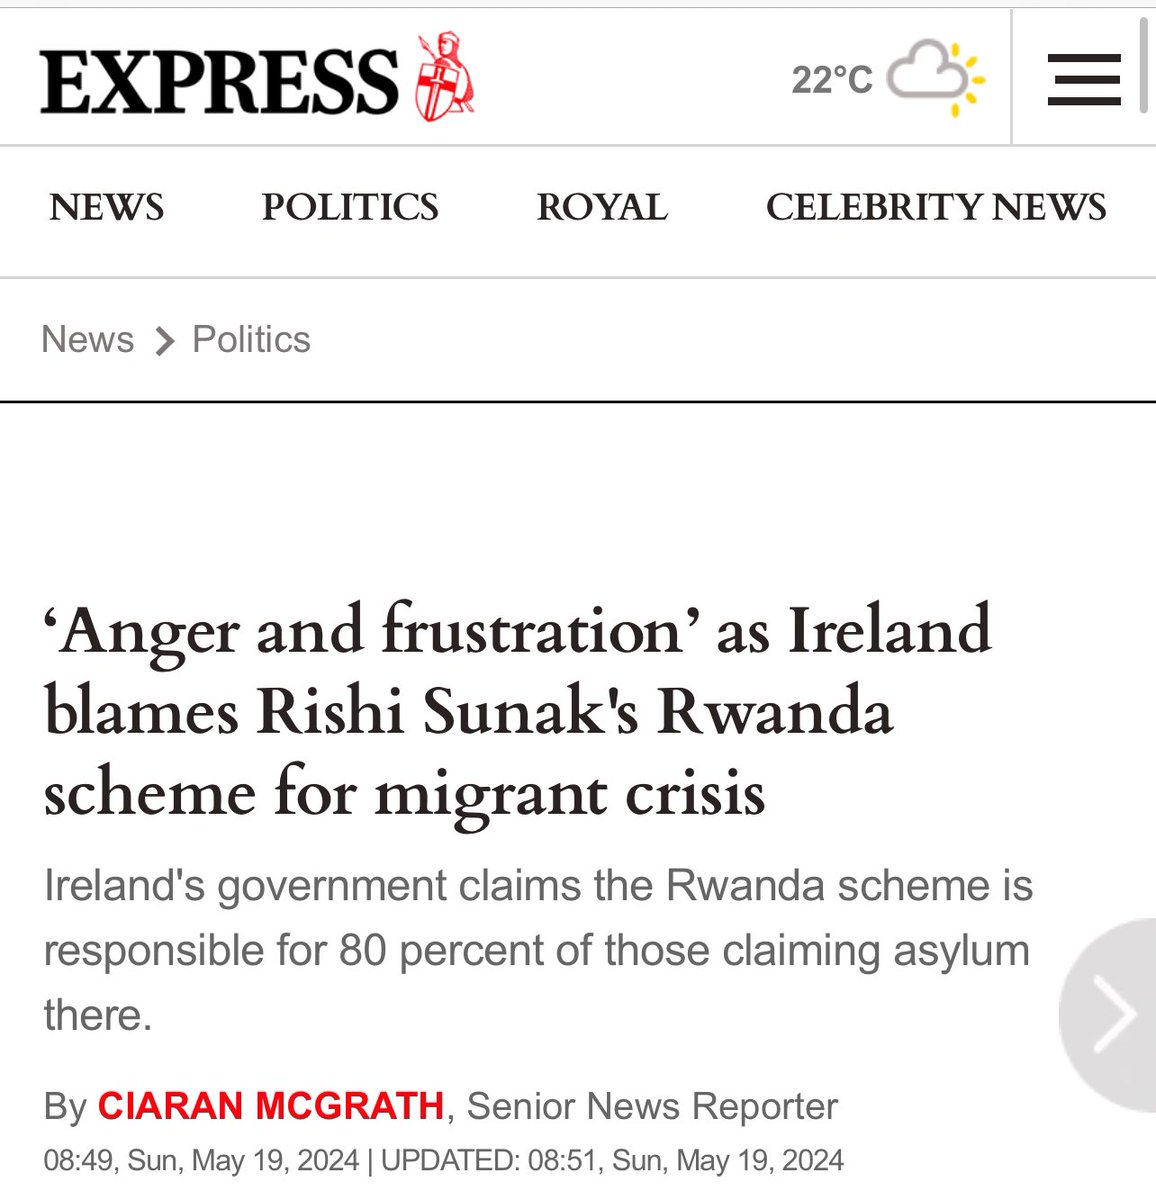 Tories have been astonishingly successful in persuading Express readers that “the boats” are the EU’s fault. The level of ignorance AND anti-Irish rhetoric in the comments on this story beggar belief: None are aware that #Brexit brought the boats. express.co.uk/news/politics/…